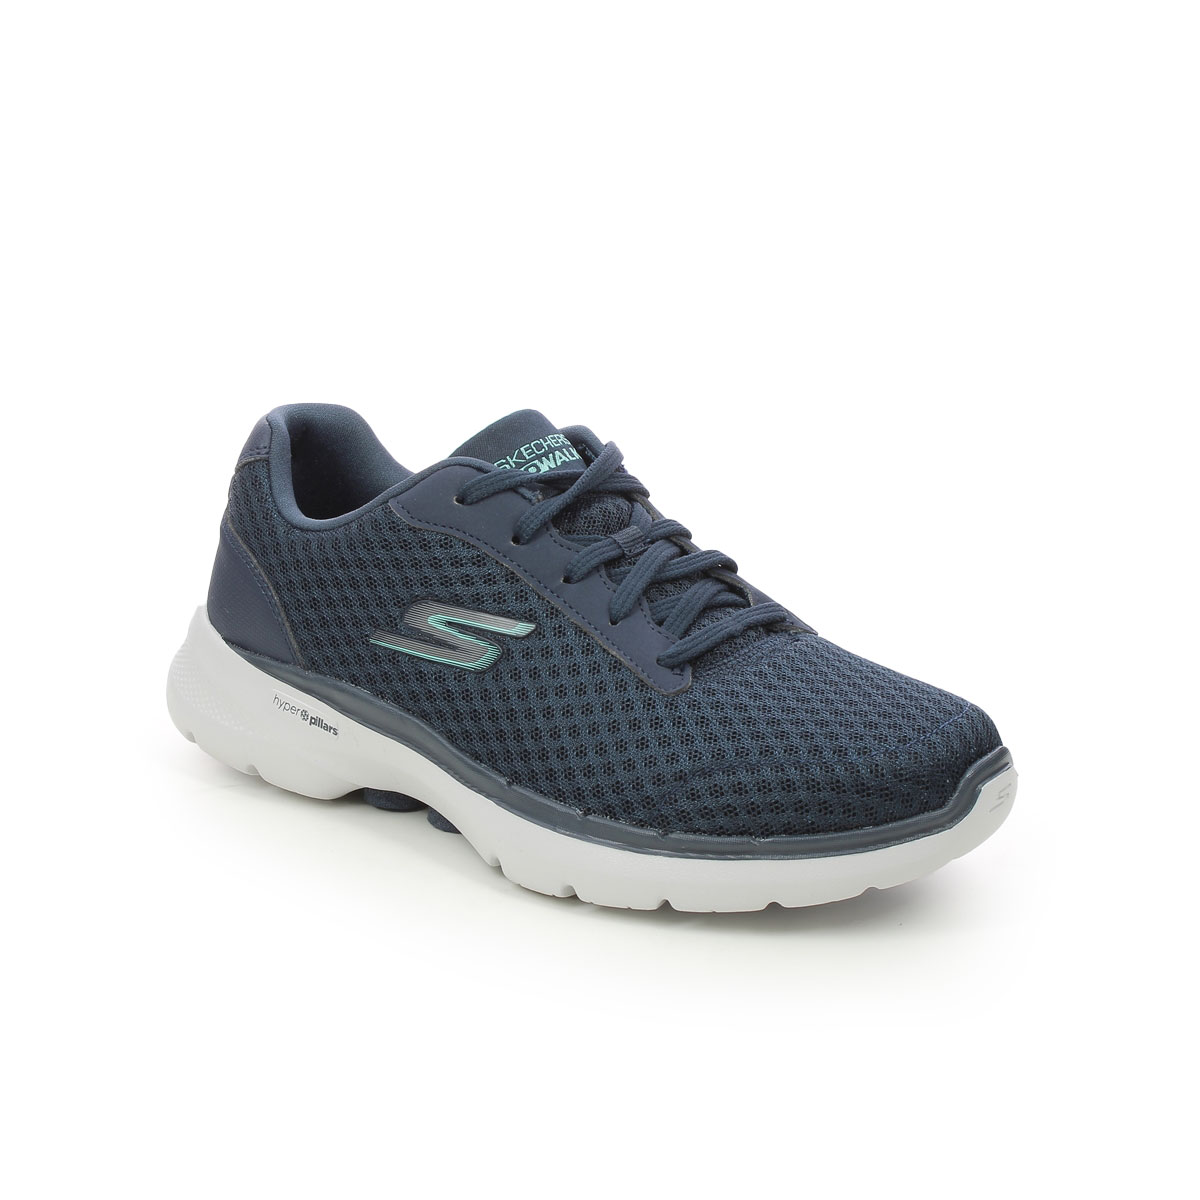 Skechers Go Walk 6 Lace 124514 NVTQ Navy Turquoise trainers